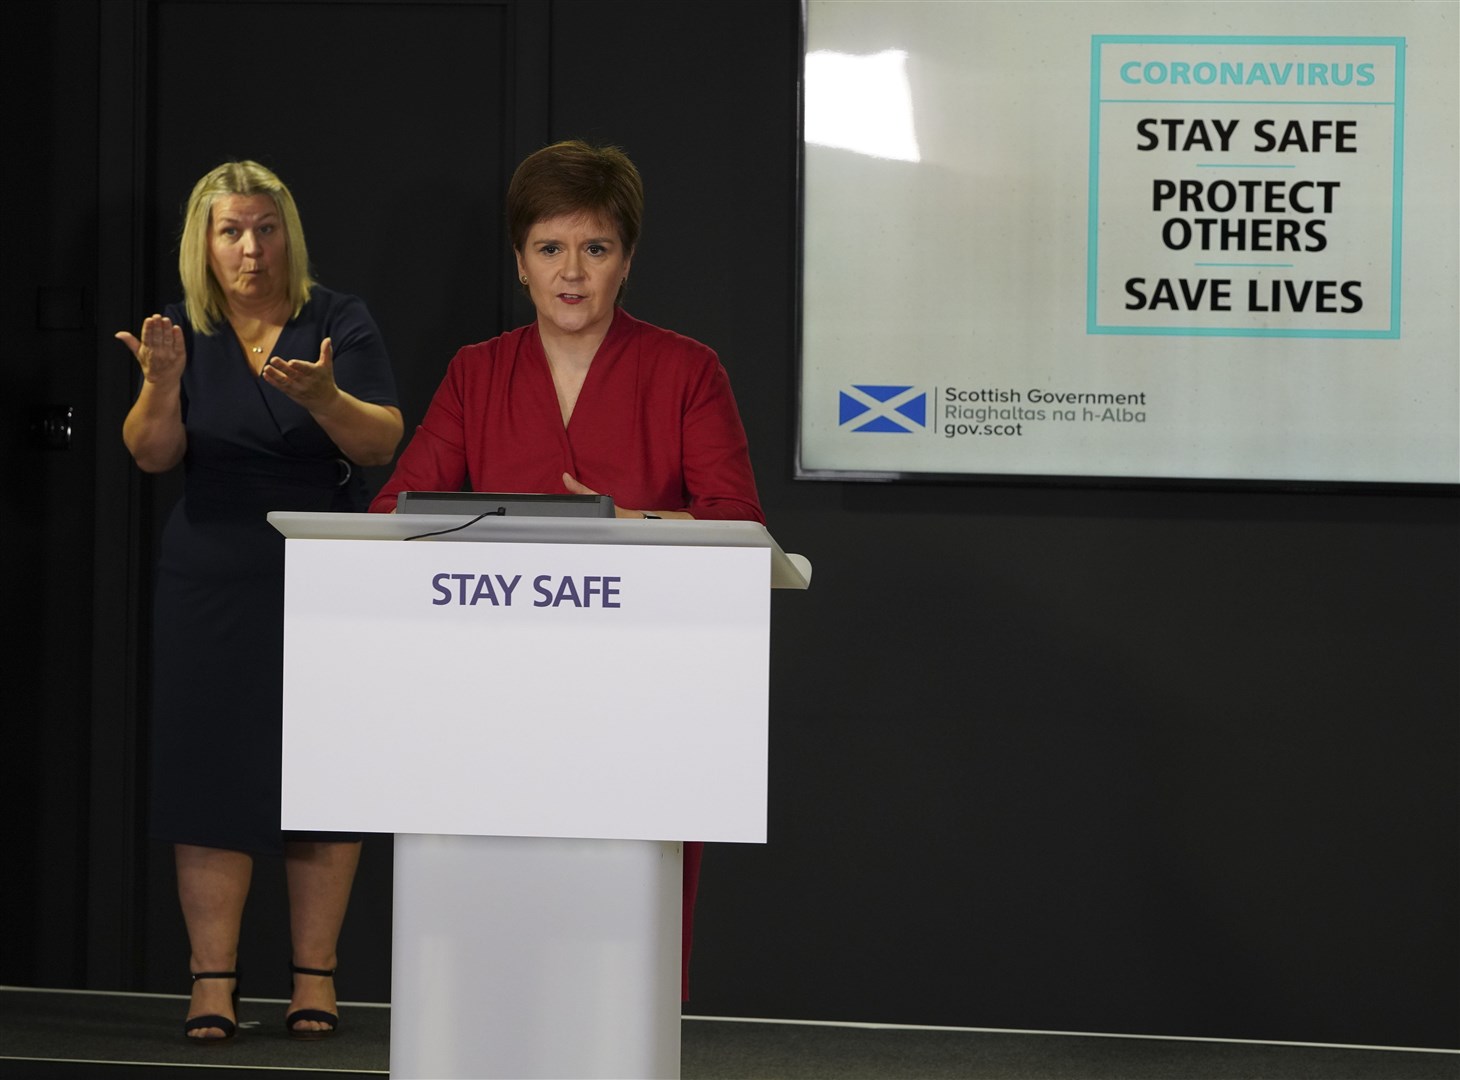 Nicola Sturgeon's message was upbeat despite three new confirmed deaths and a rise in hospital cases.